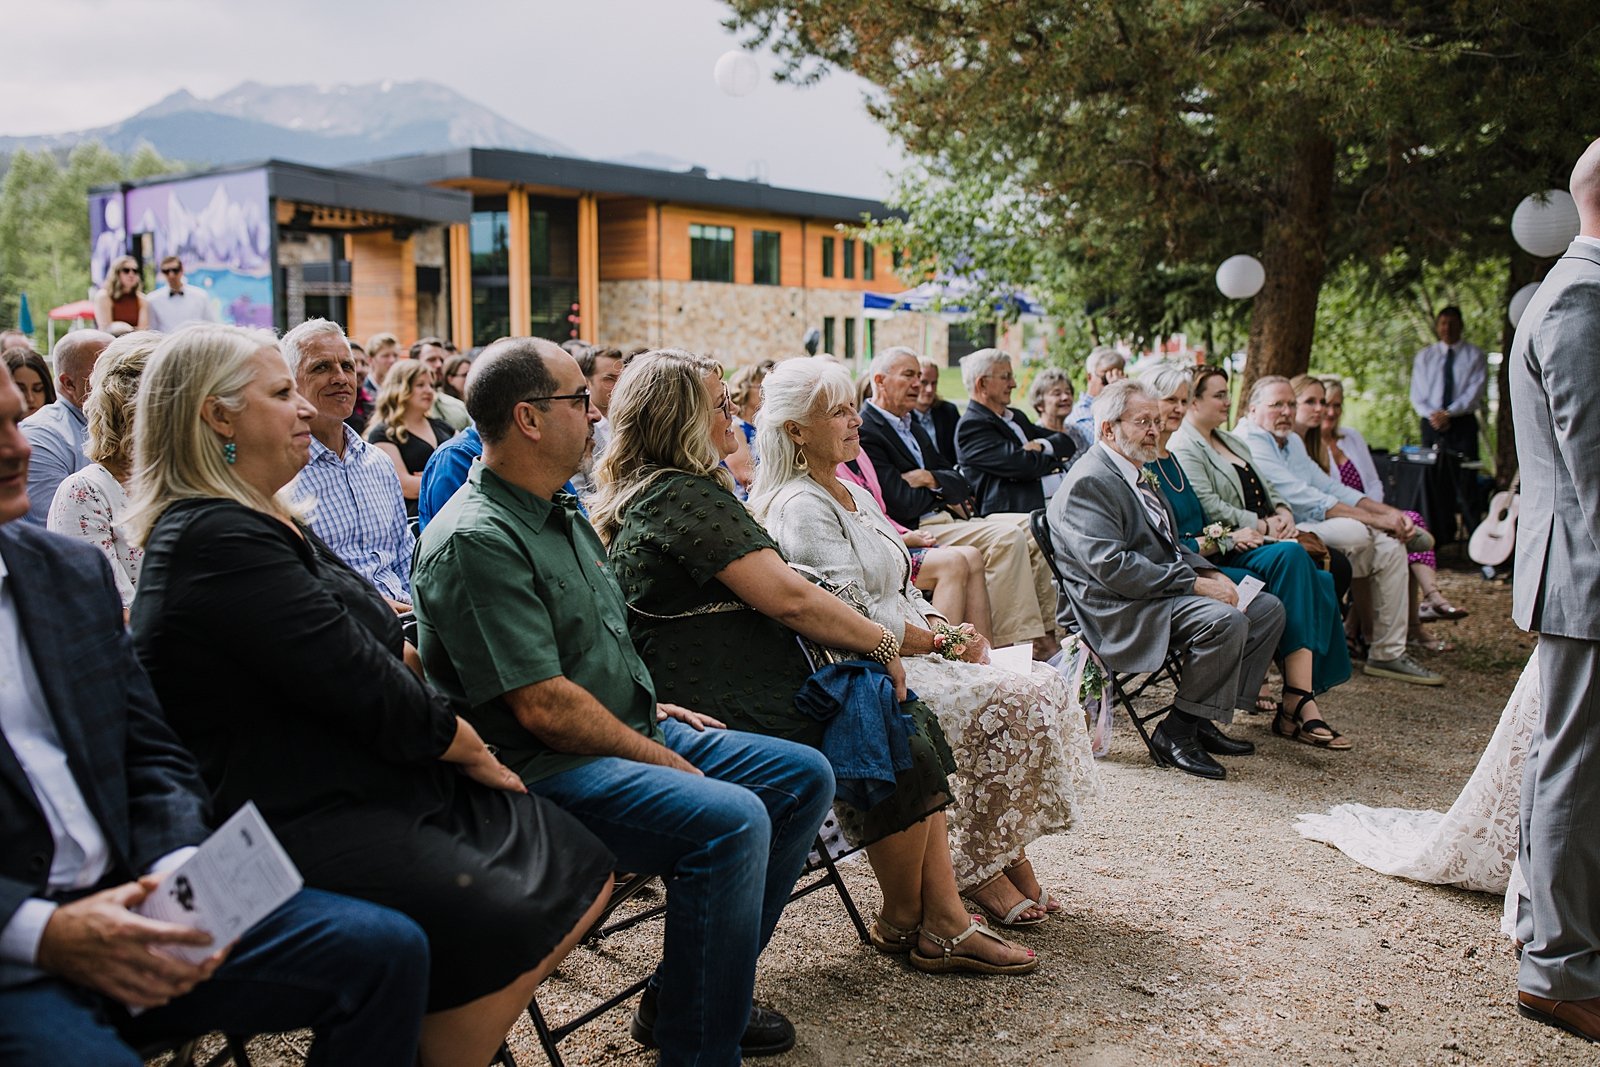 guests watching bride and groom, silverthorne pavilion wedding ceremony, silverthorne colorado mountain wedding, gore range wedding, silverthorne pavilion wedding photographer